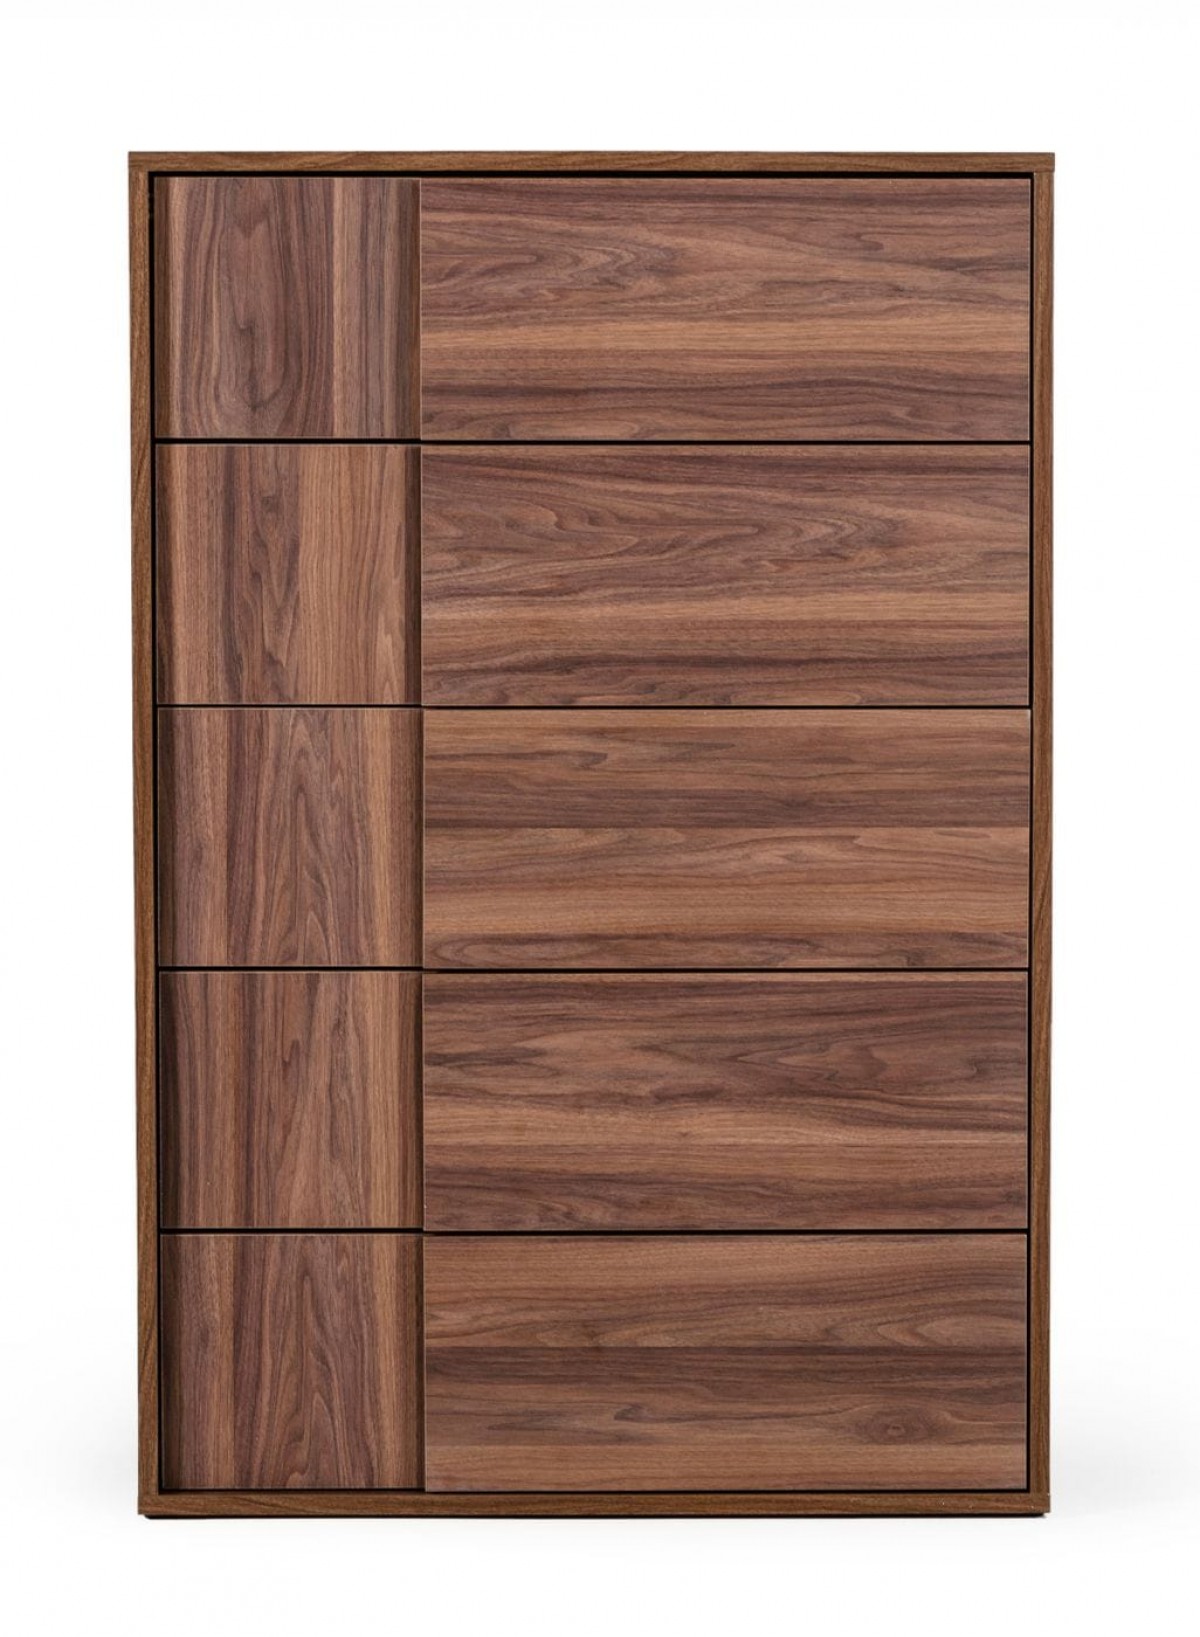 Made in Italy Wood High End Bedroom Sets - Click Image to Close